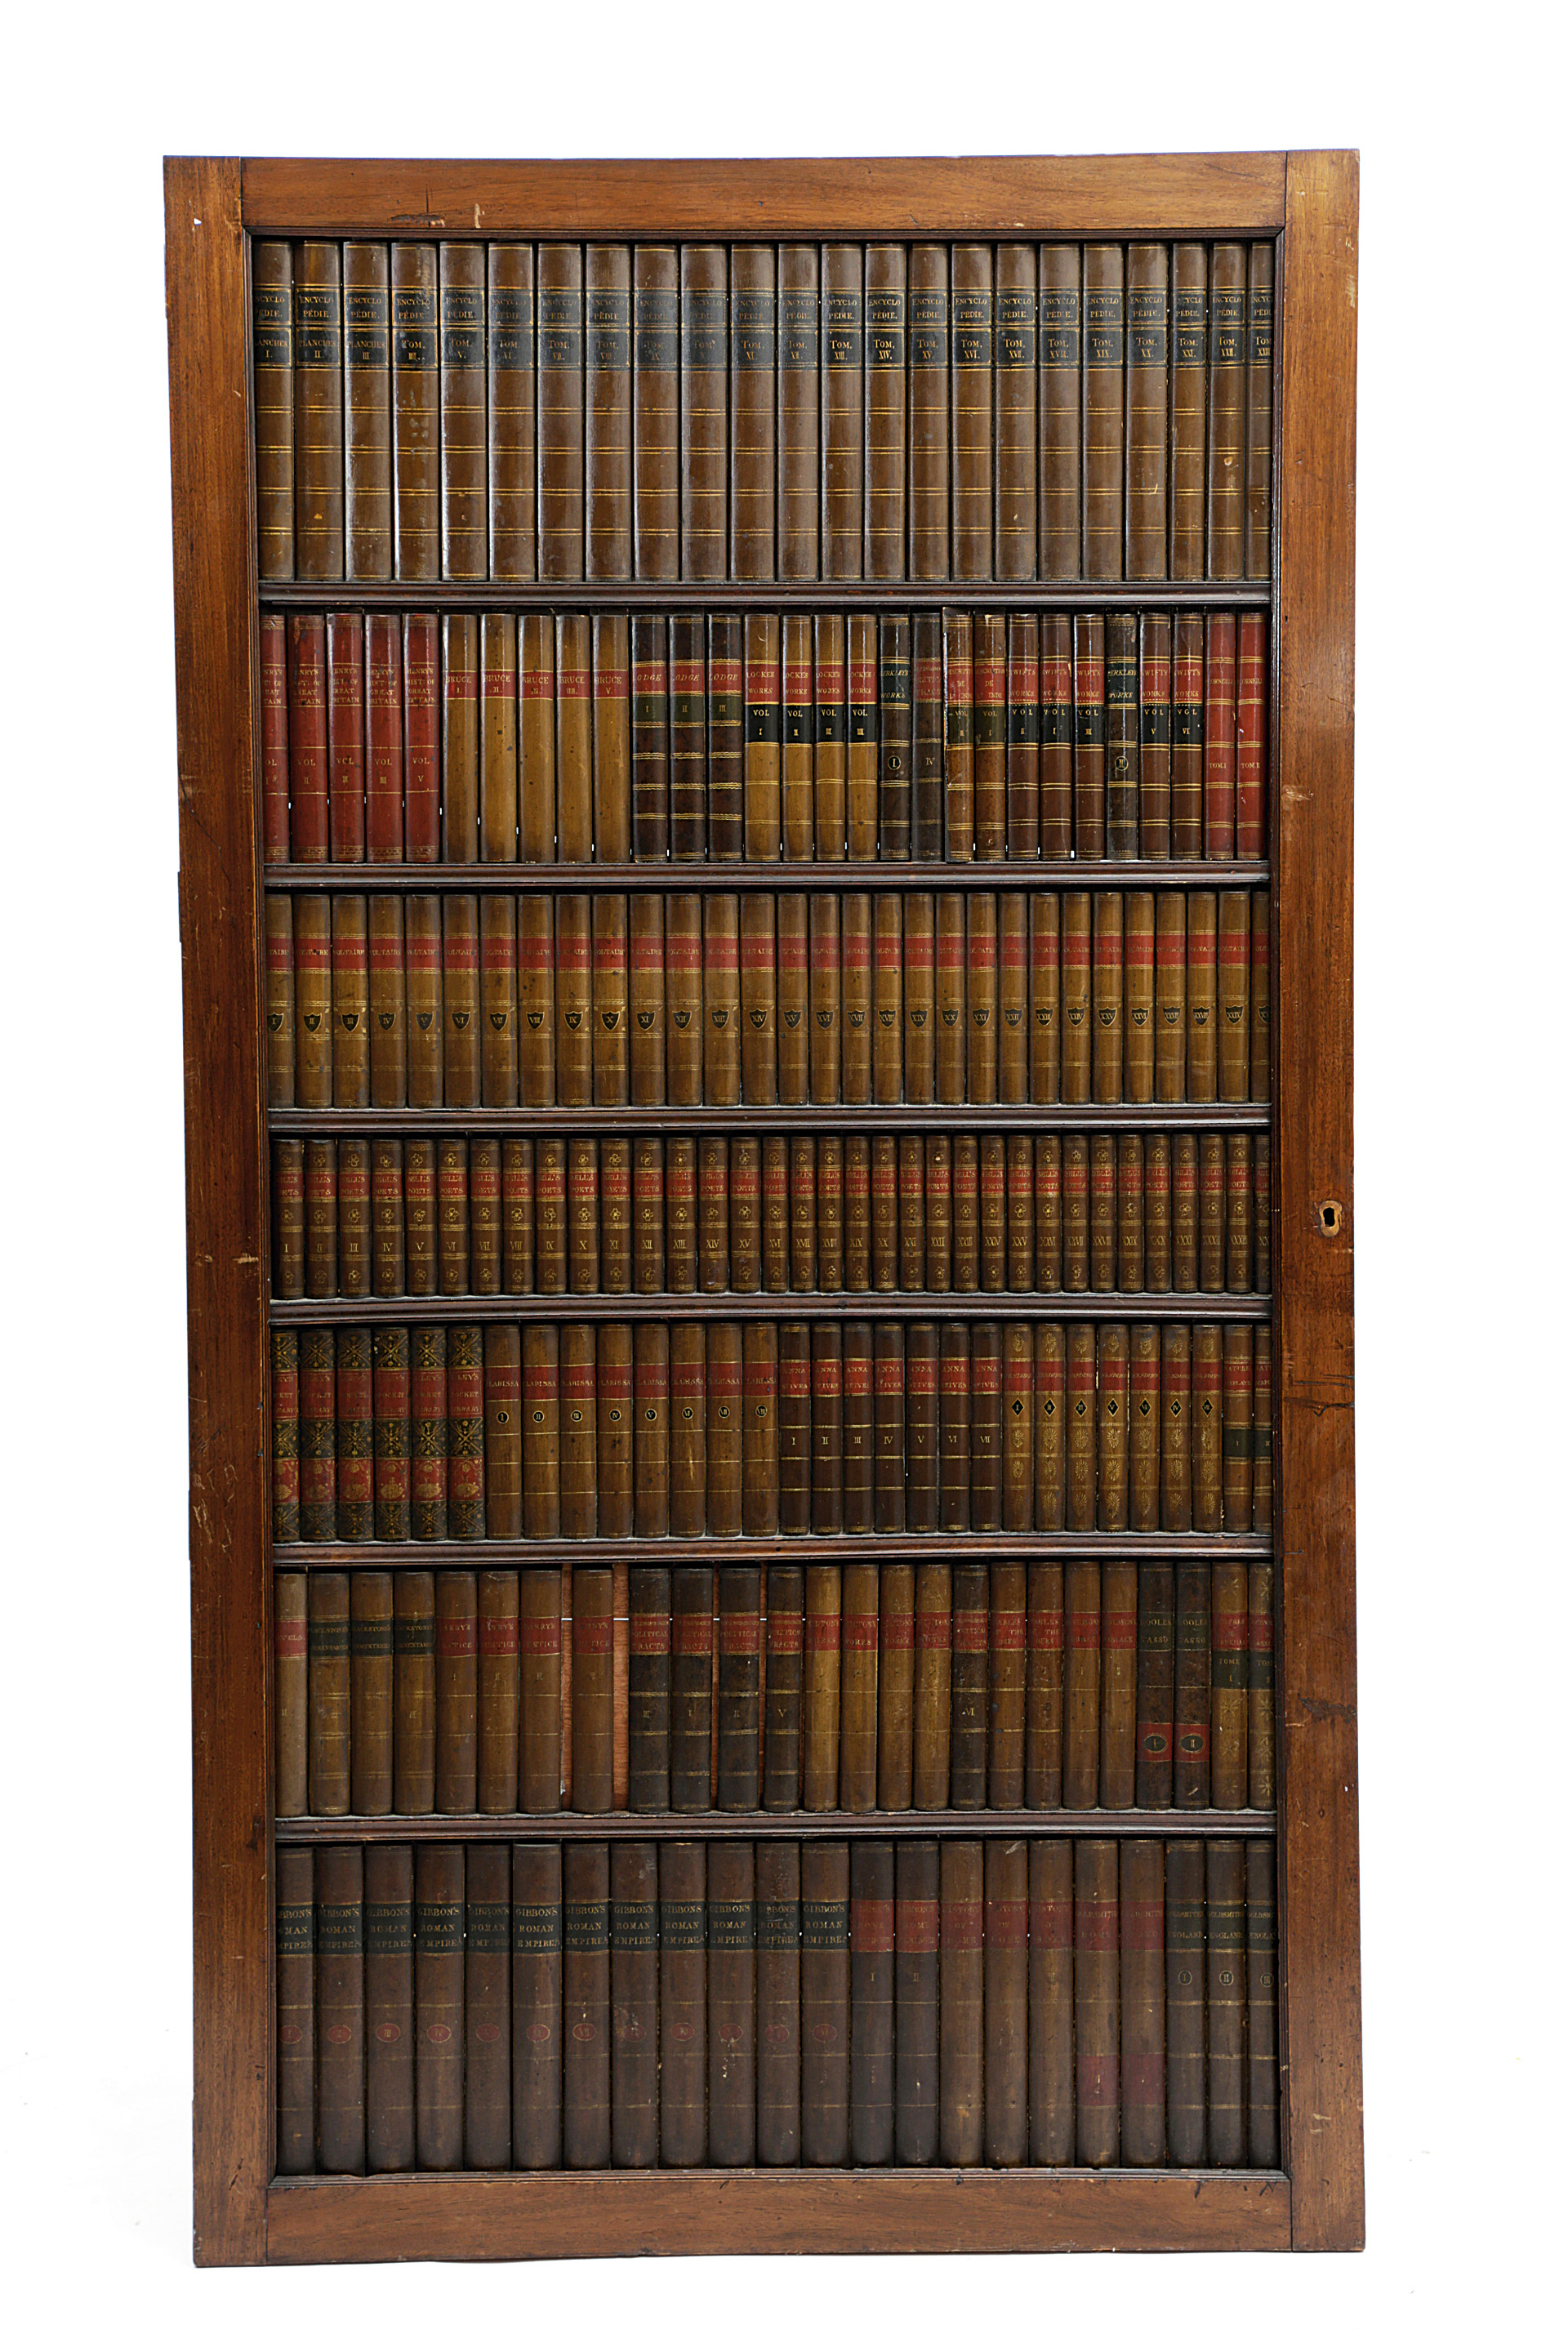 A PAIR OF MAHOGANY FAUX BOOK SPINE LIBRARY DOORS 20TH CENTURY (2) 181.6cm high, 101.8cm